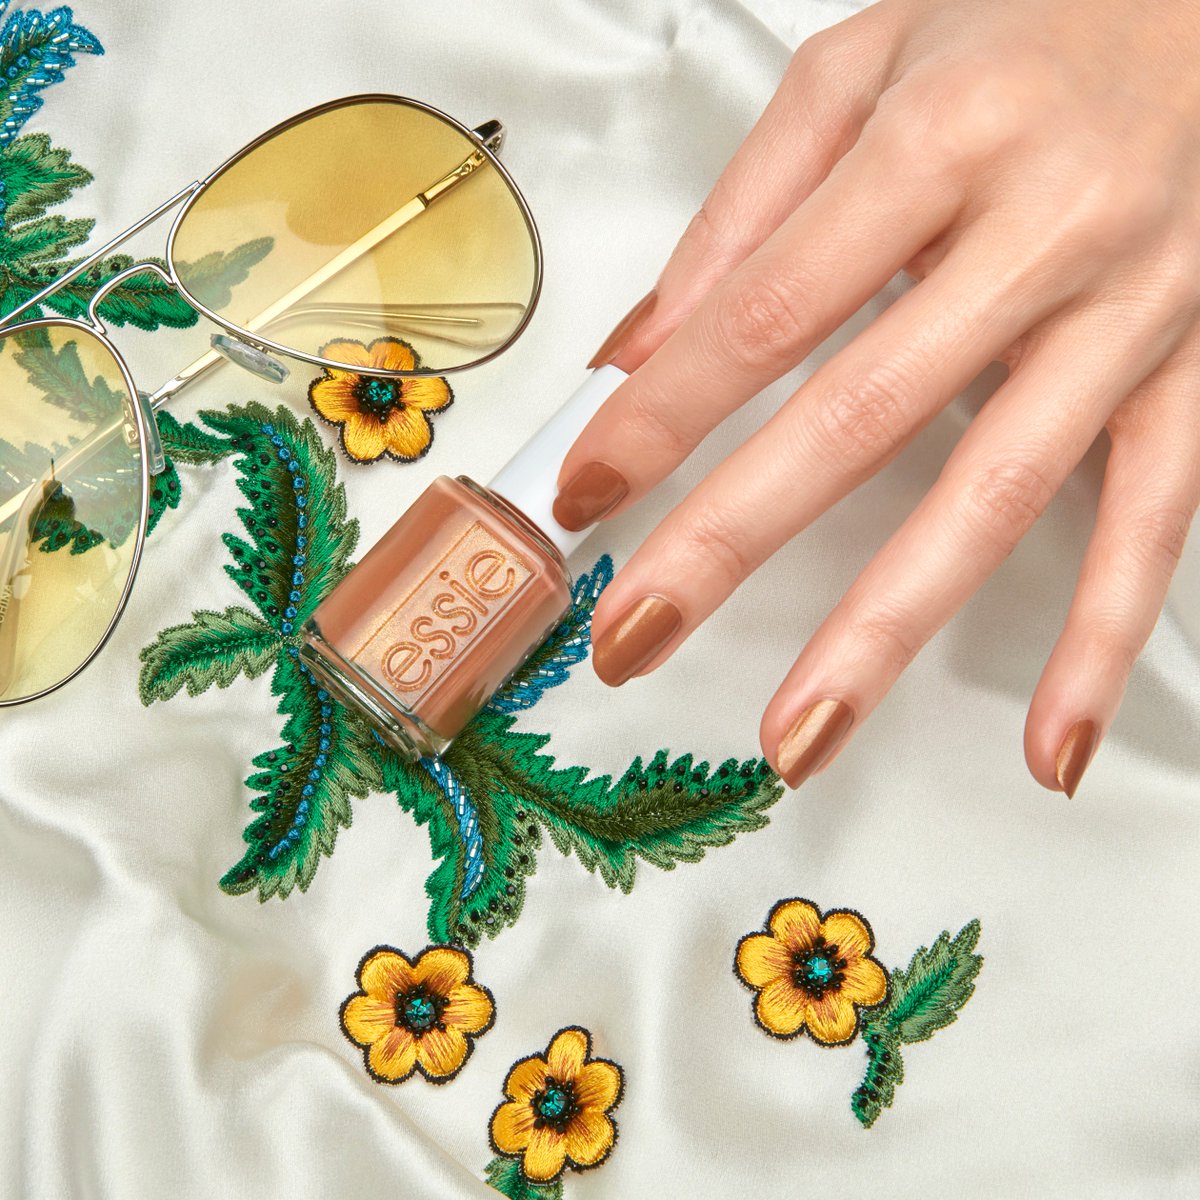 Forget the rain! There's nothing but #sunnydaze ahead with this amber shimmer shade from essie summer 2018 collection🌞💅 #essiesummer #essielove 💞